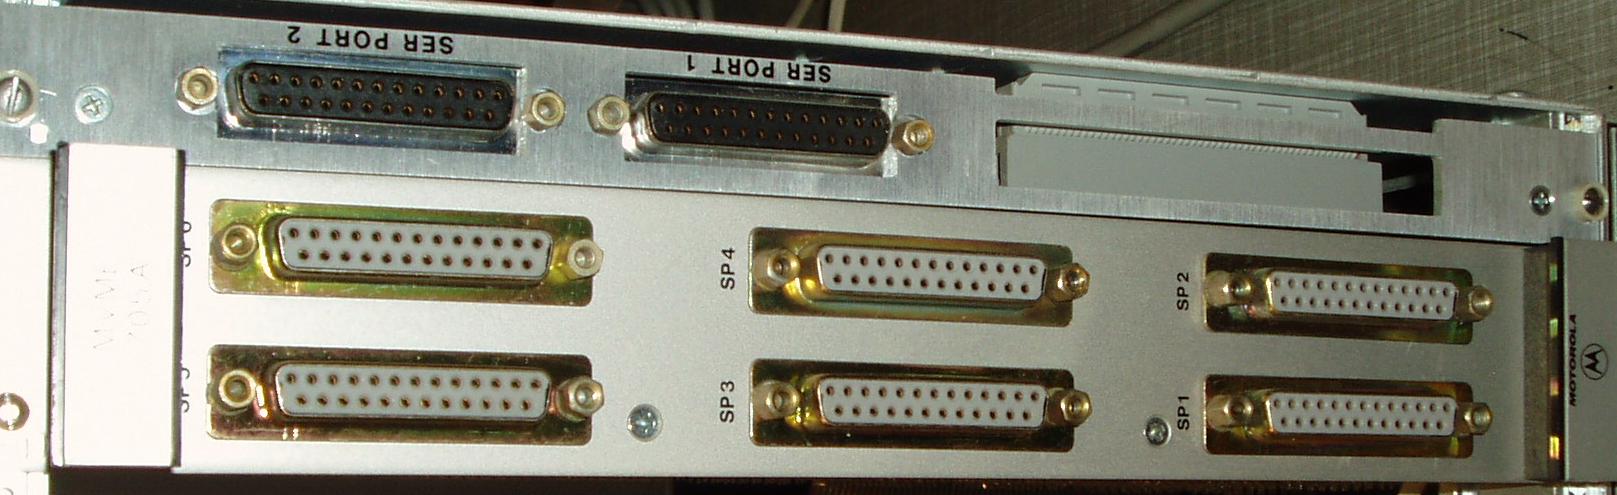 Backplane of an MVME131XT system with 8 serial ports, all DB25F